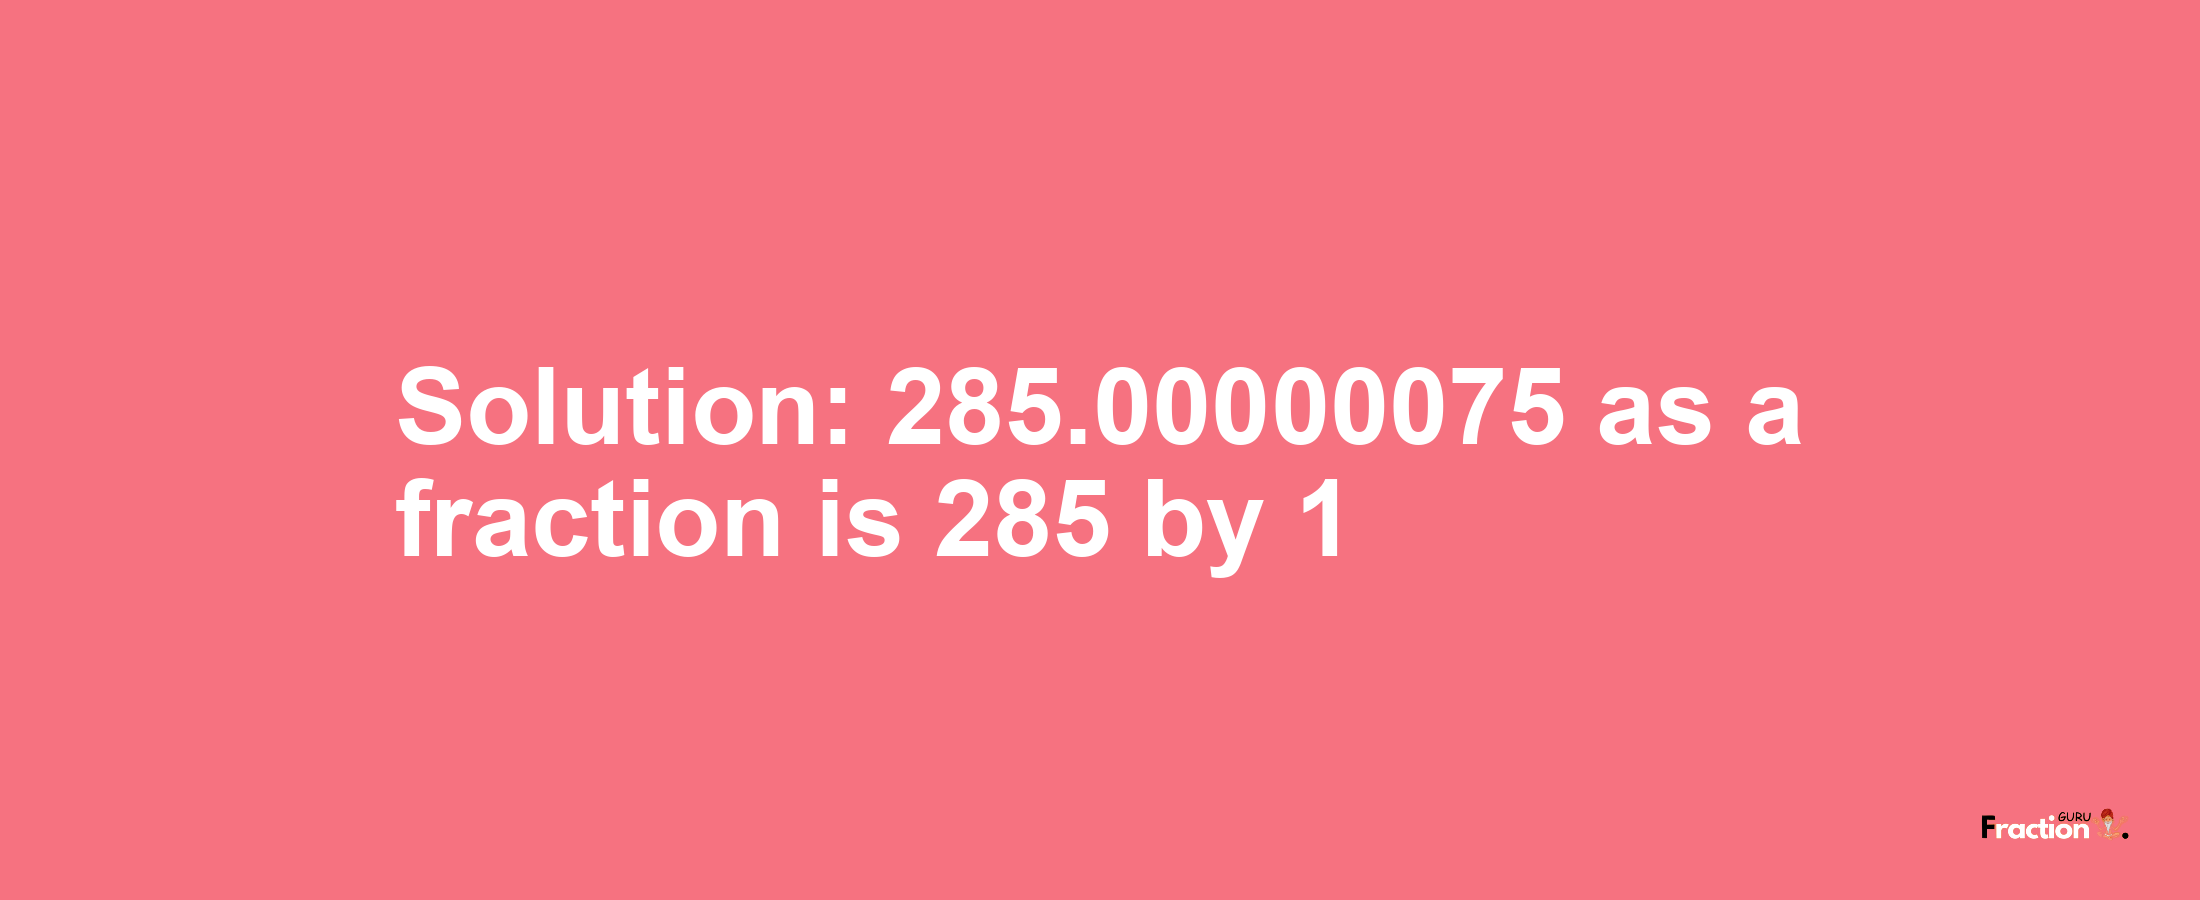 Solution:285.00000075 as a fraction is 285/1